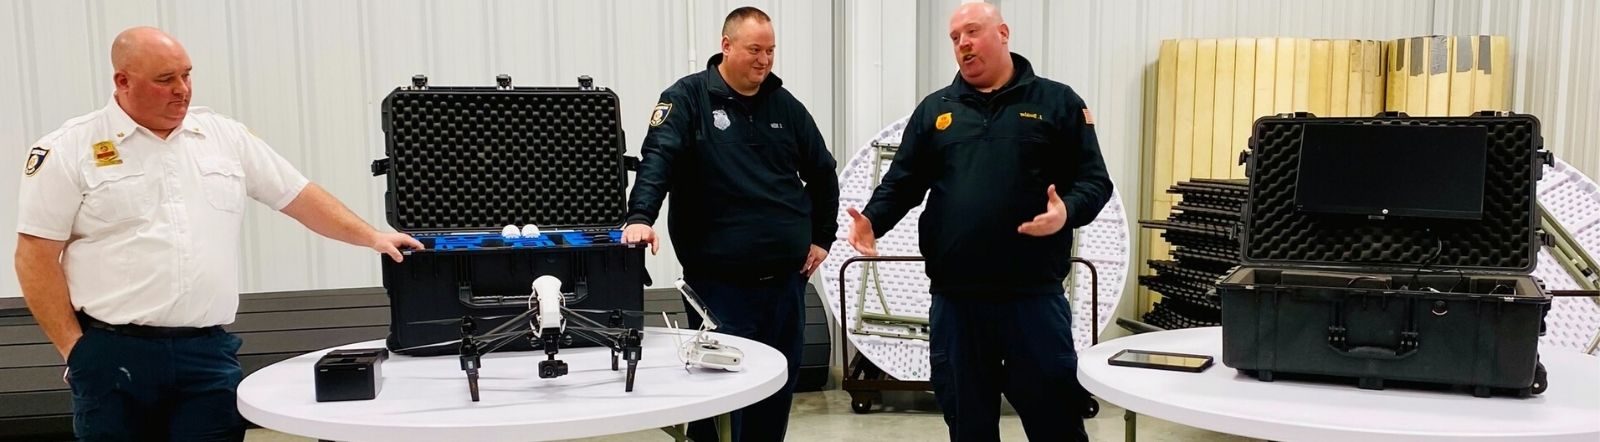 team of firefighters explain how drones are used in missions